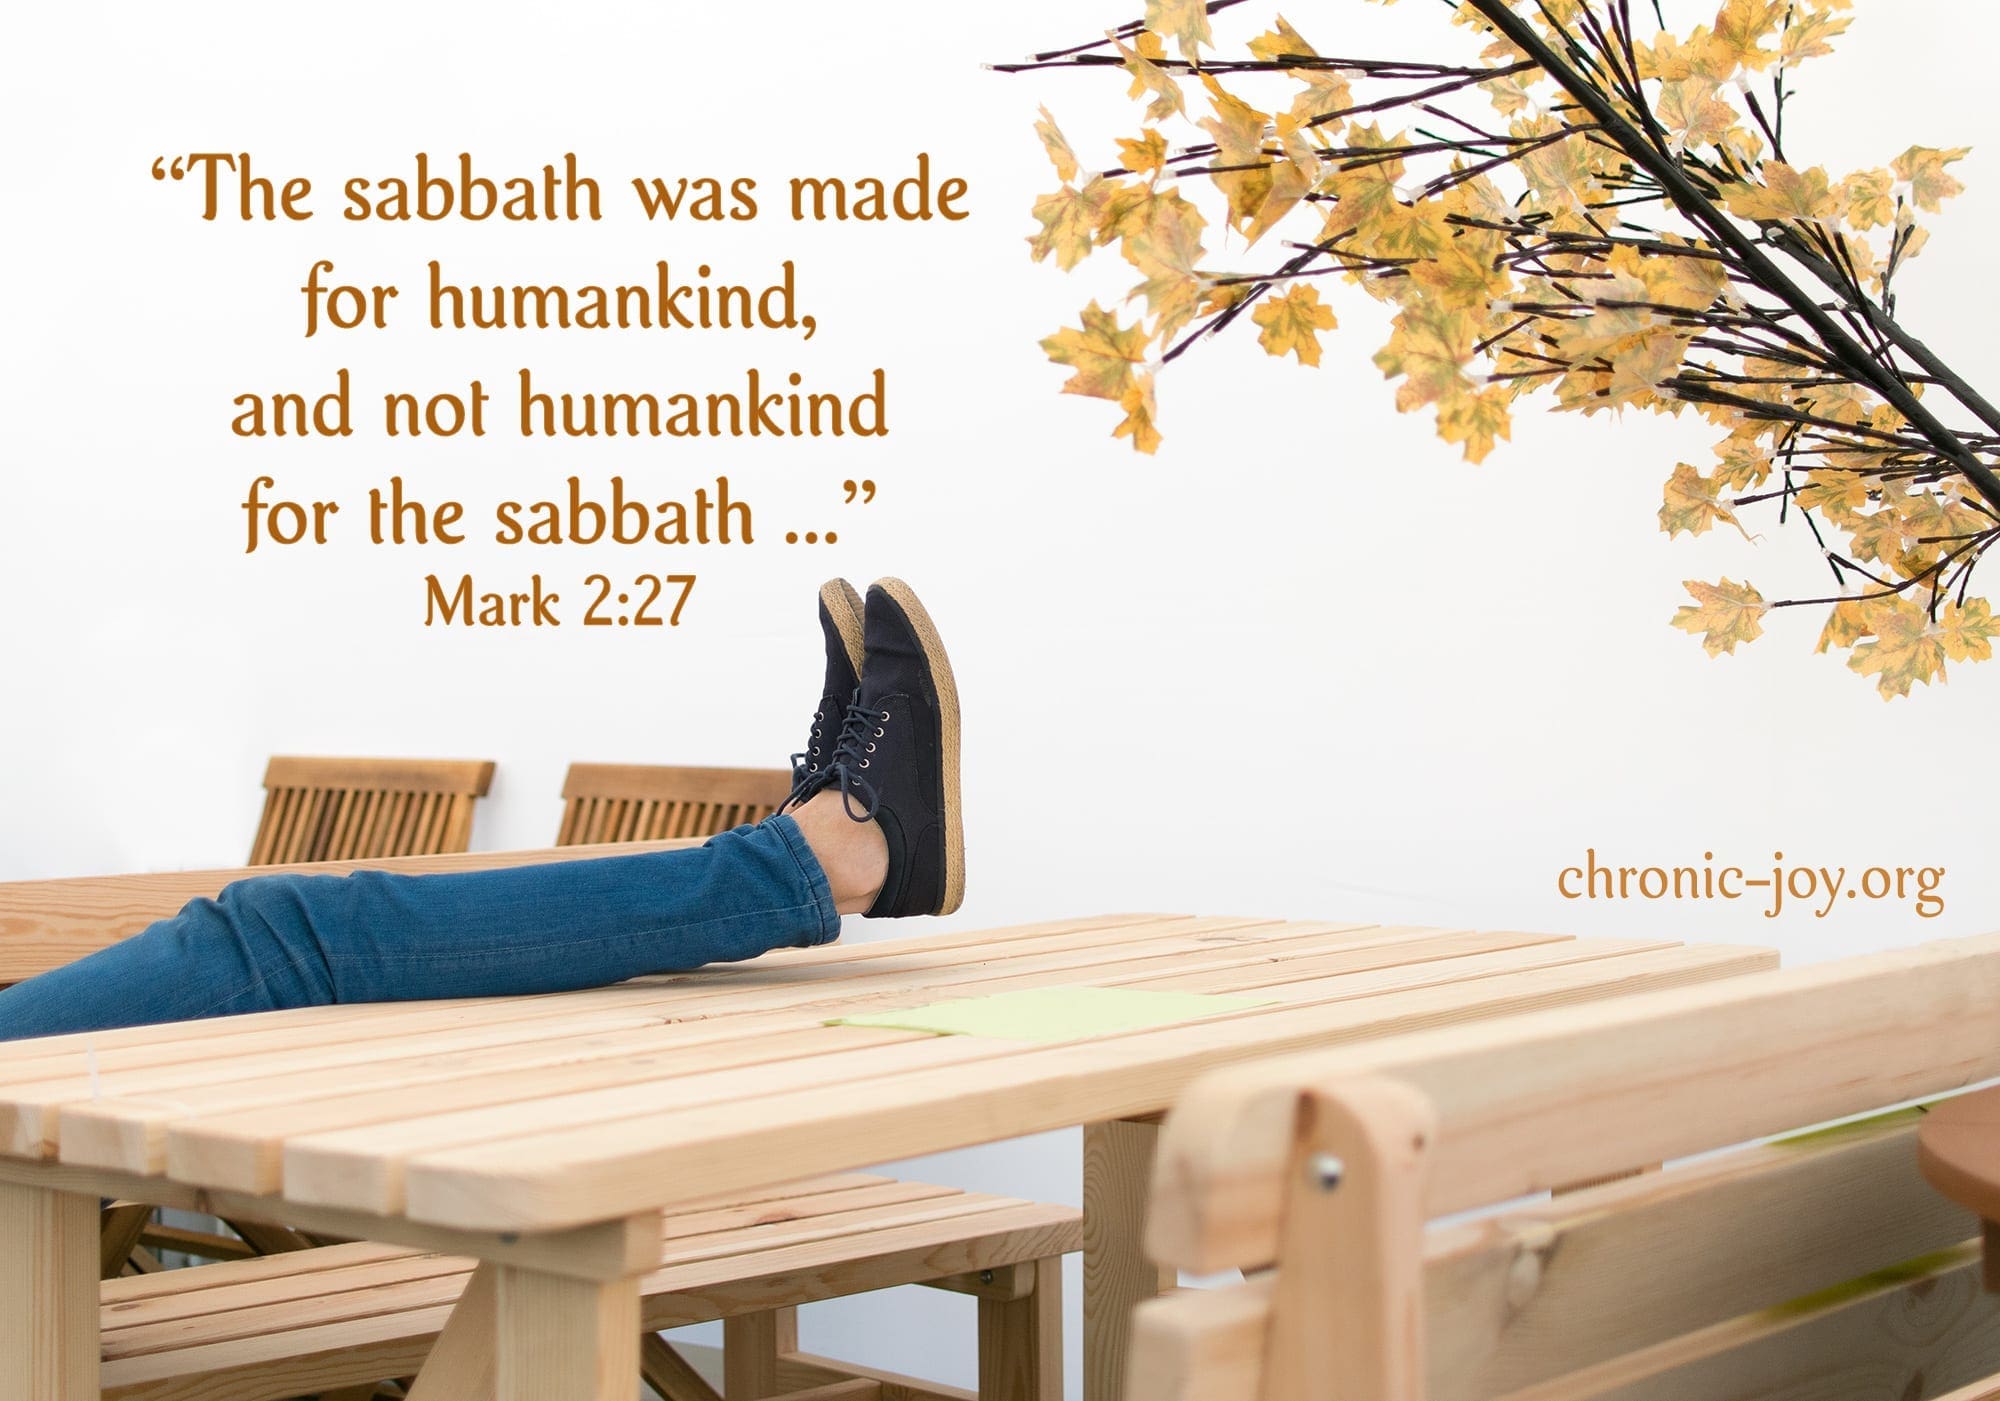 "The sabbath was made for humankind, and not humankind for the sabbath ..." Mark 2:27